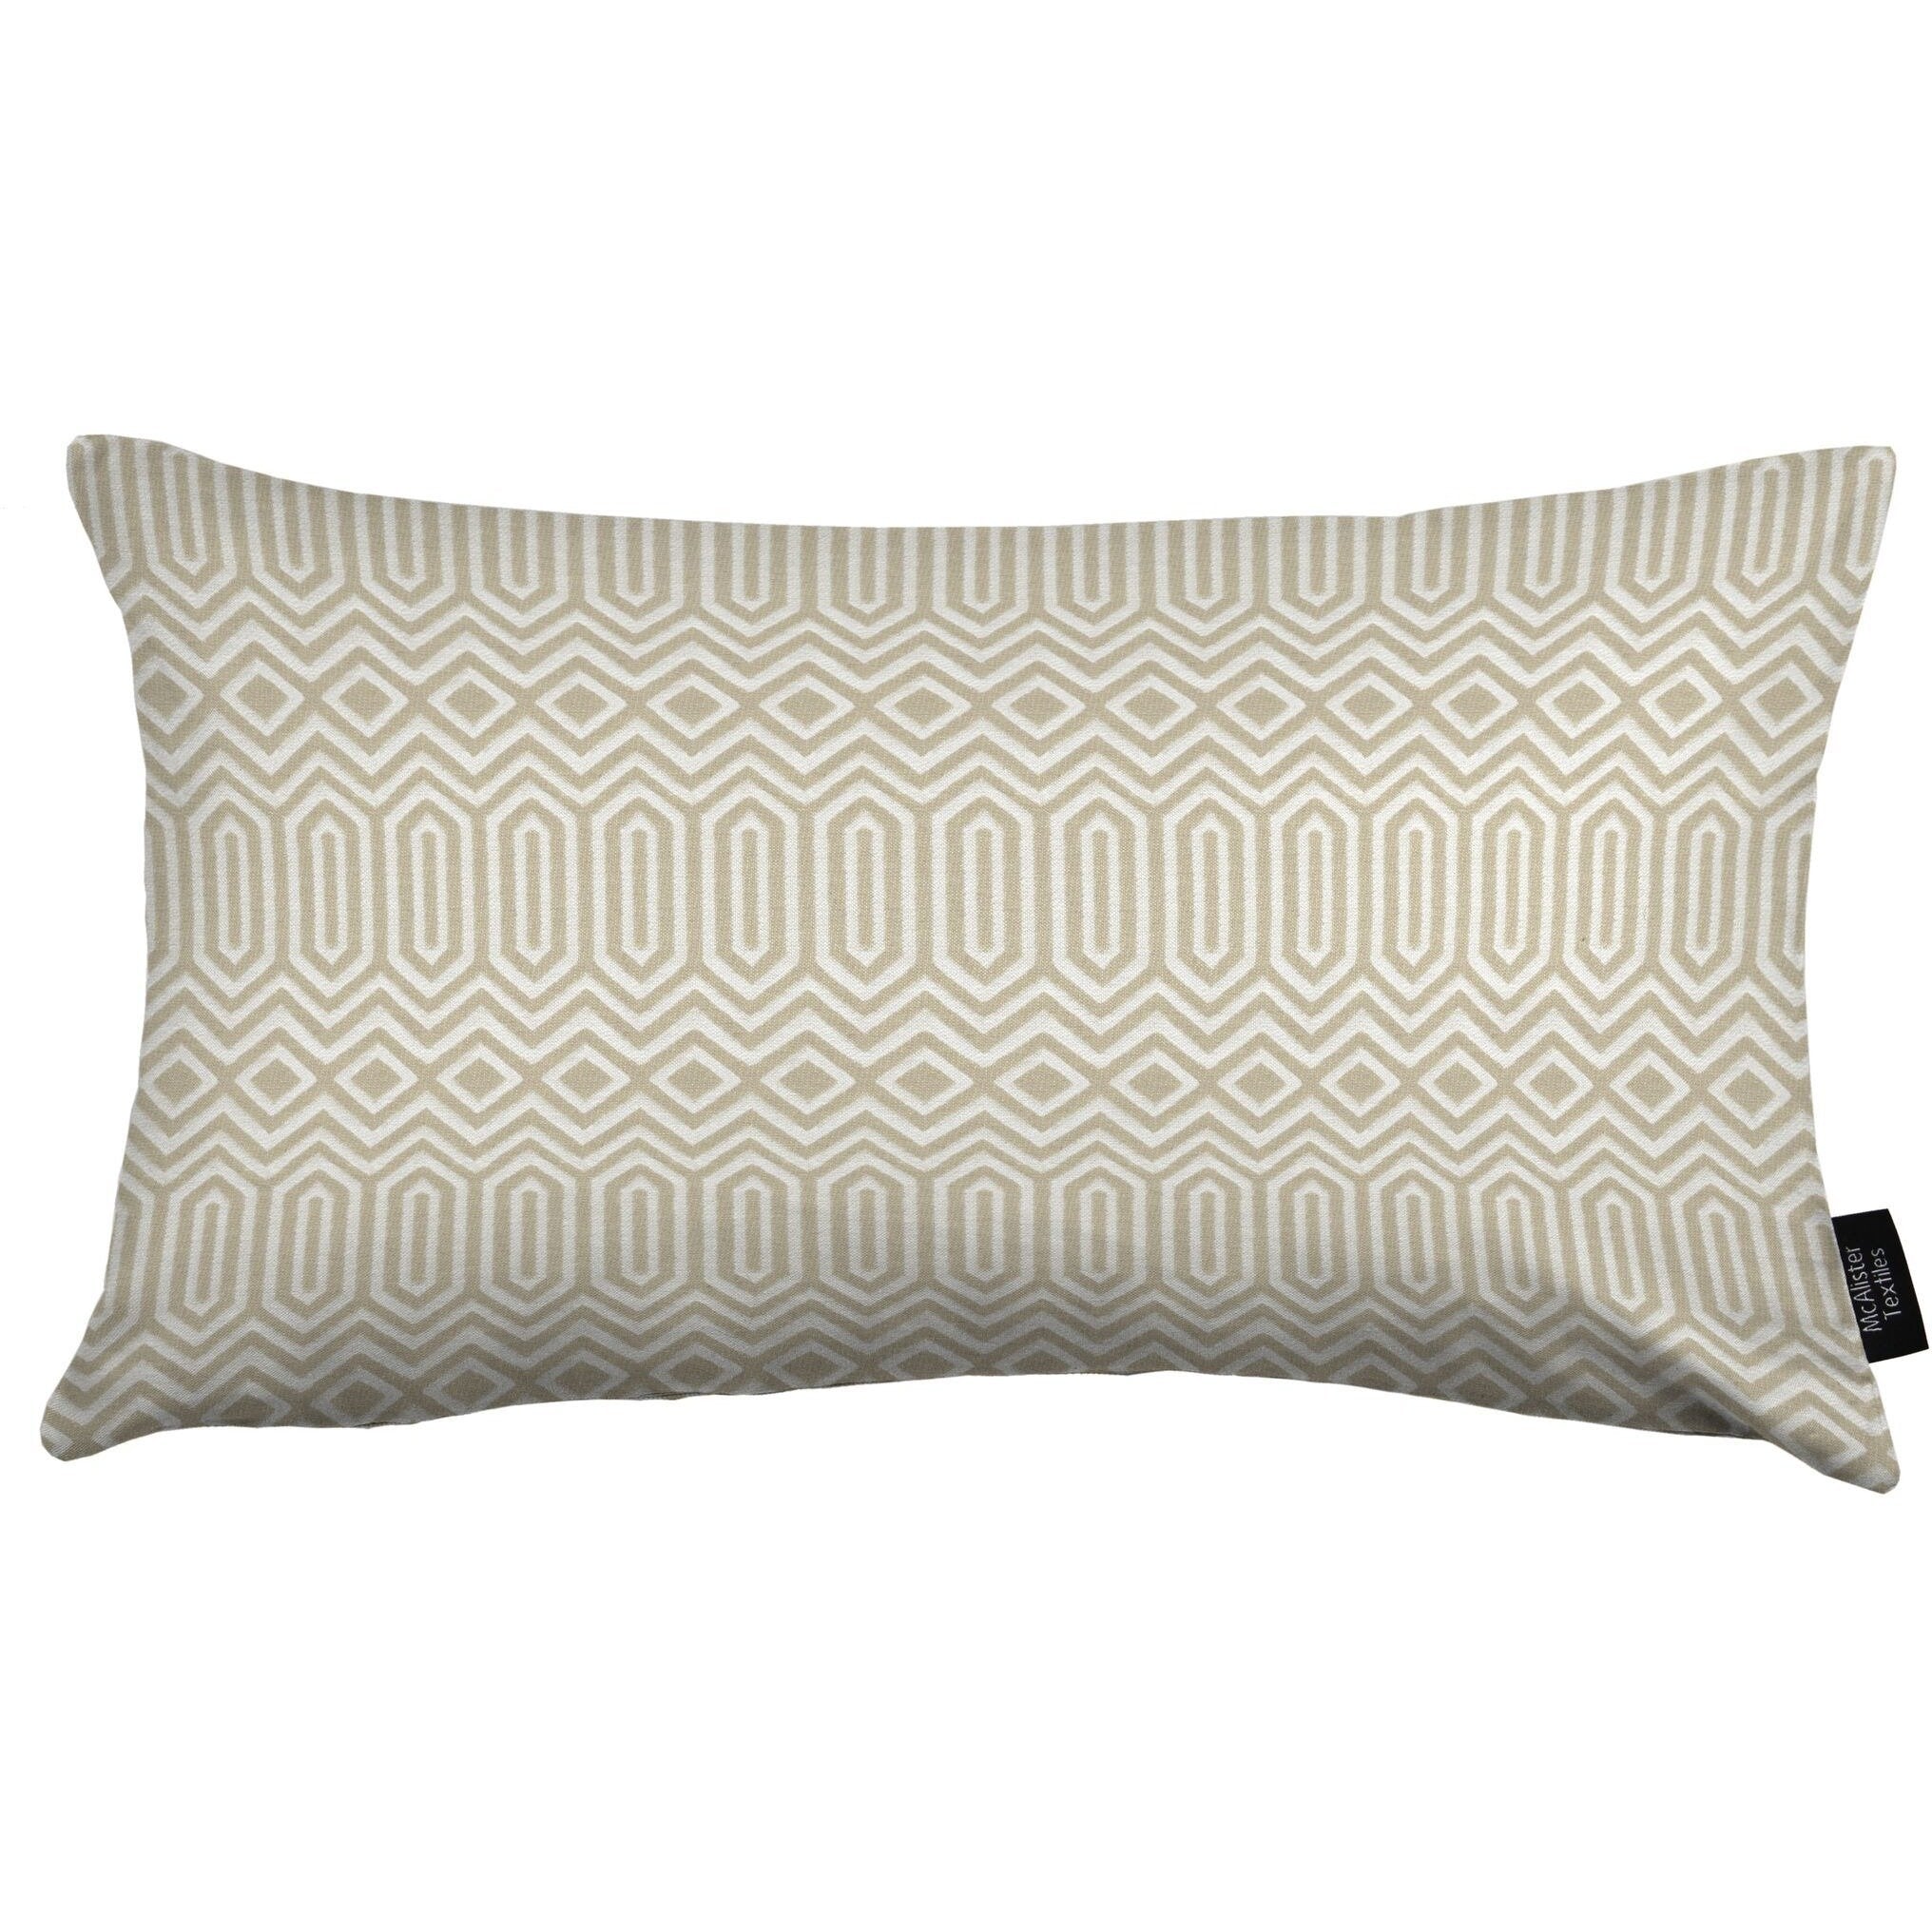 McAlister Textiles Colorado Geometric Taupe Beige Cushion Cushions and Covers Cover Only 50cm x 30cm 